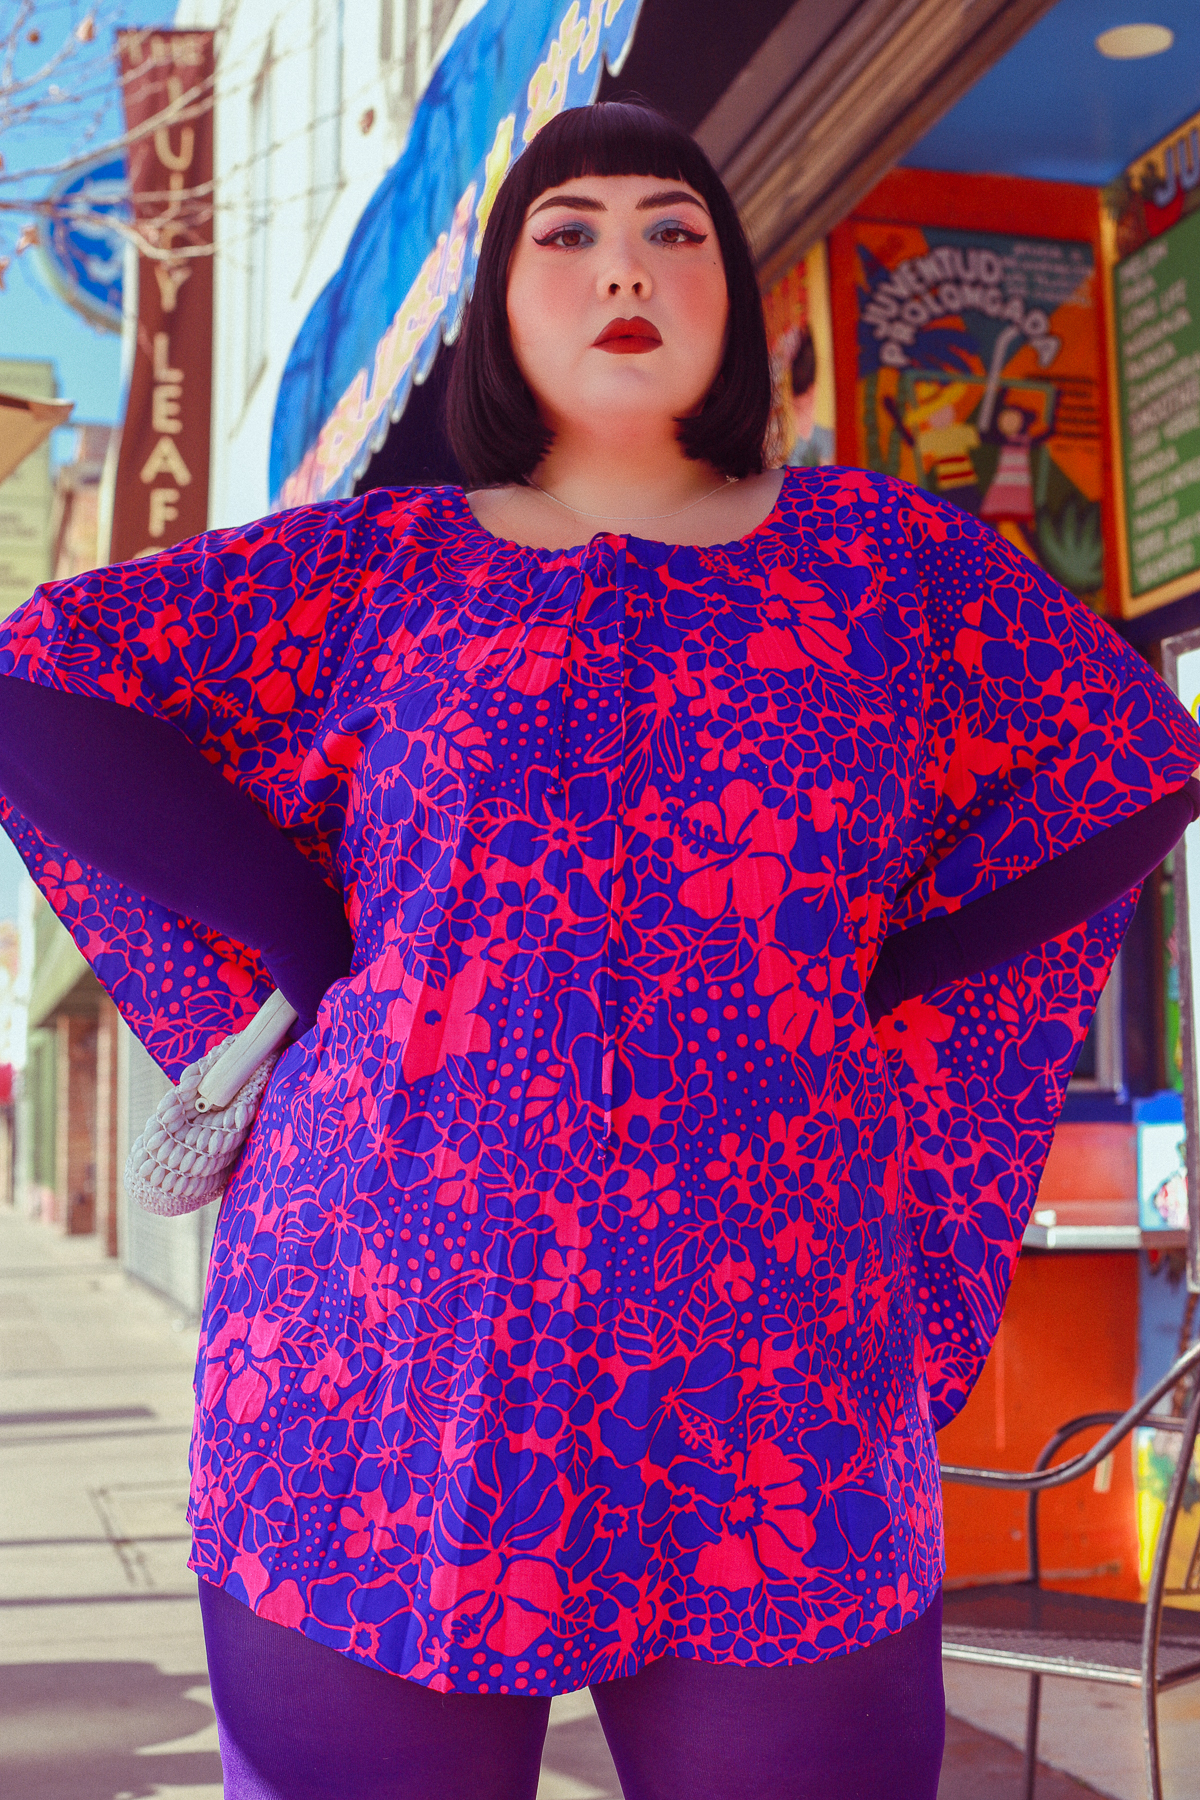 Plus Size Fashion Spring Lookbook By We Love Mary - We Love Colors